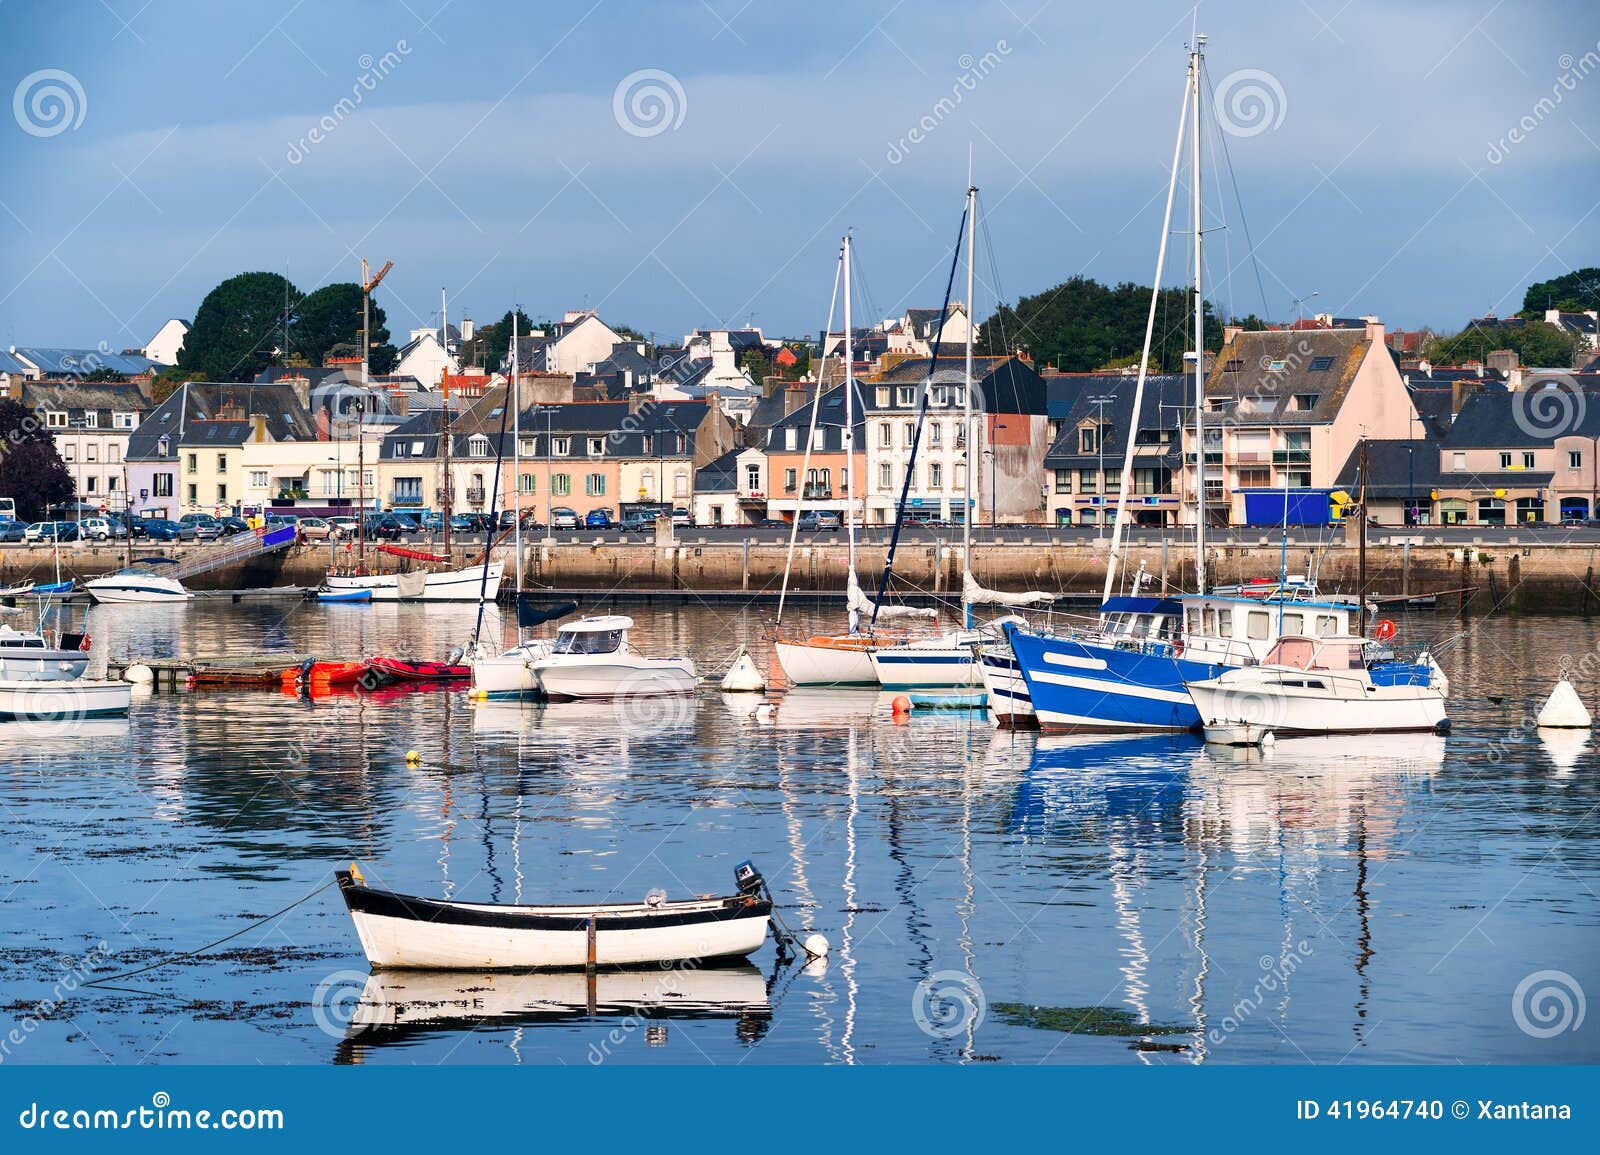 port of concarneau, brittany, france